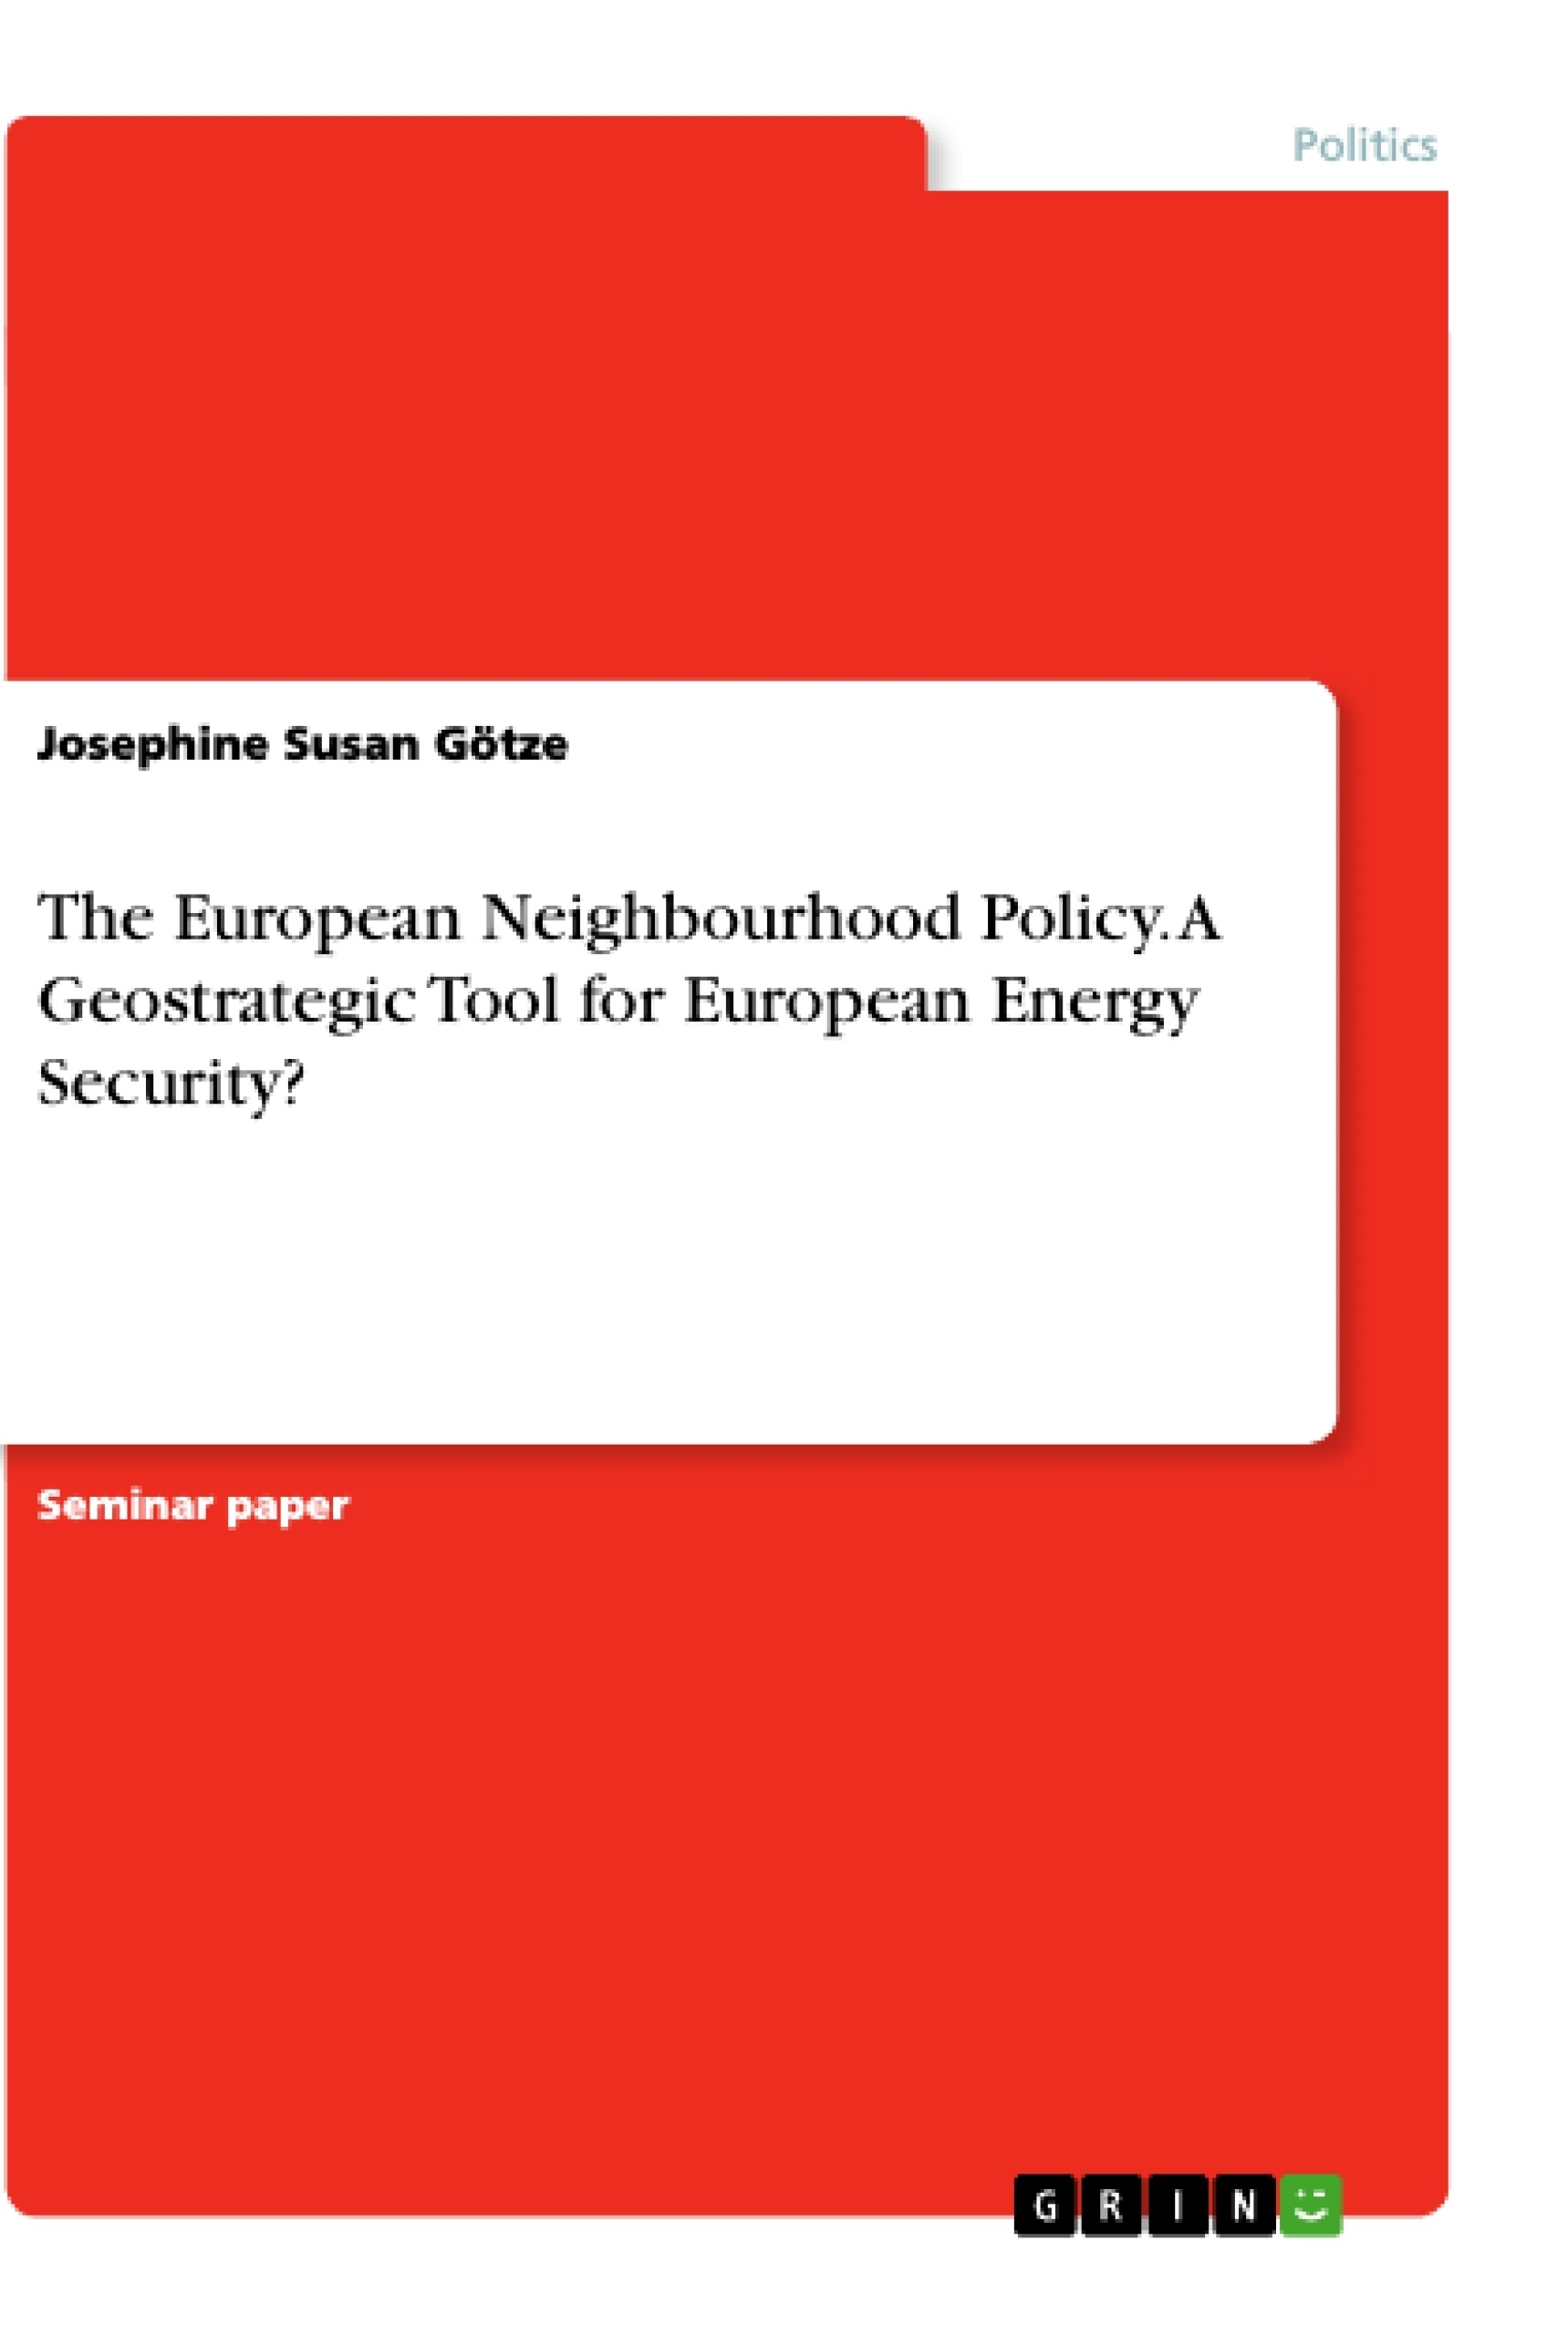 Title: The European Neighbourhood Policy. A Geostrategic Tool for European Energy Security?